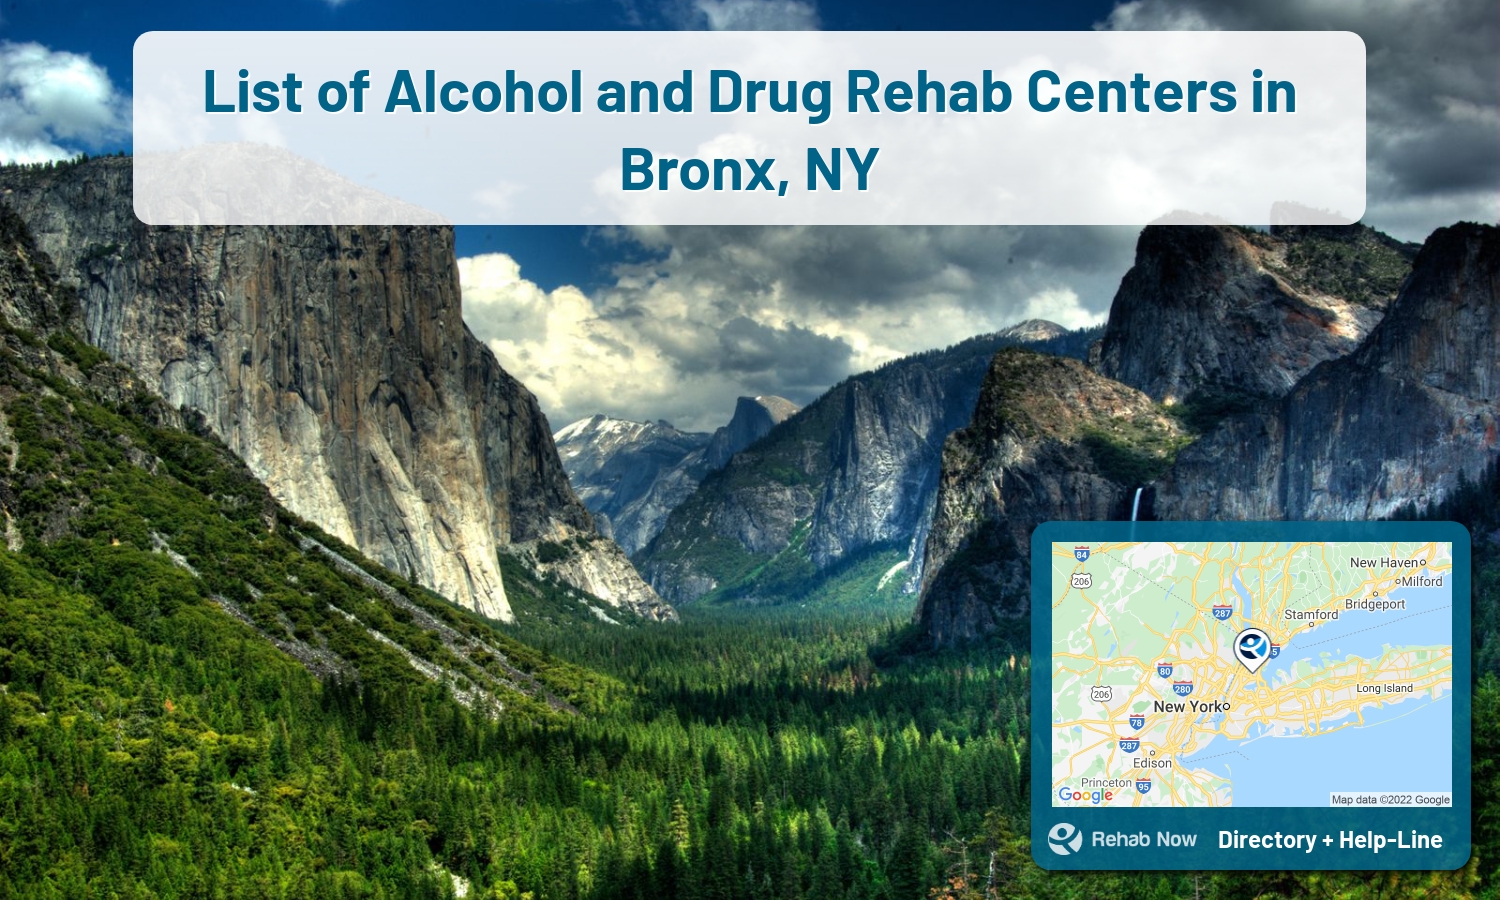 Drug rehab and alcohol treatment services in and nearby Bronx, NY. Need help choosing a treatment program? Call our free hotline!